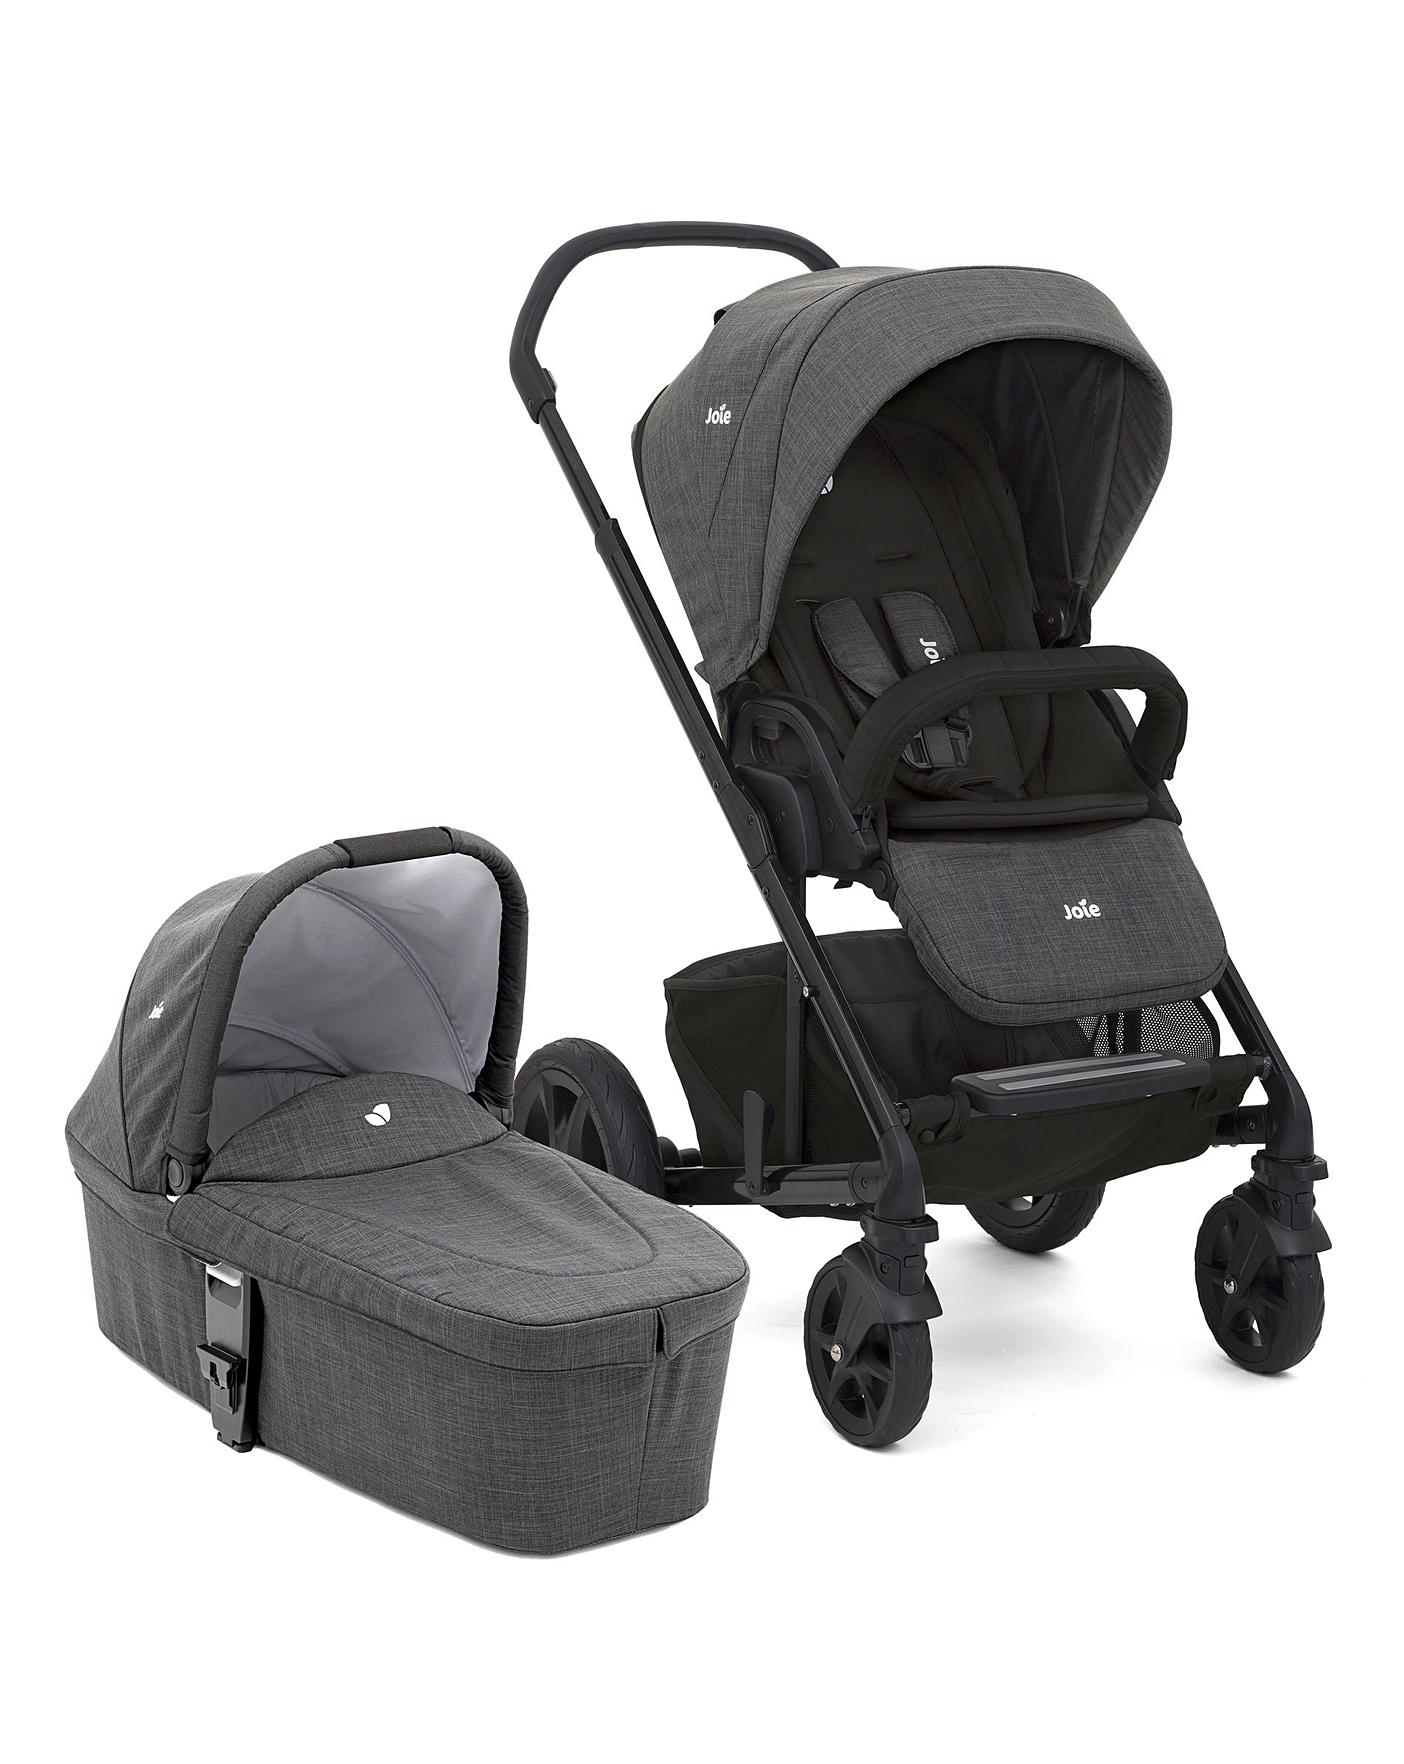 joie soft carrycot